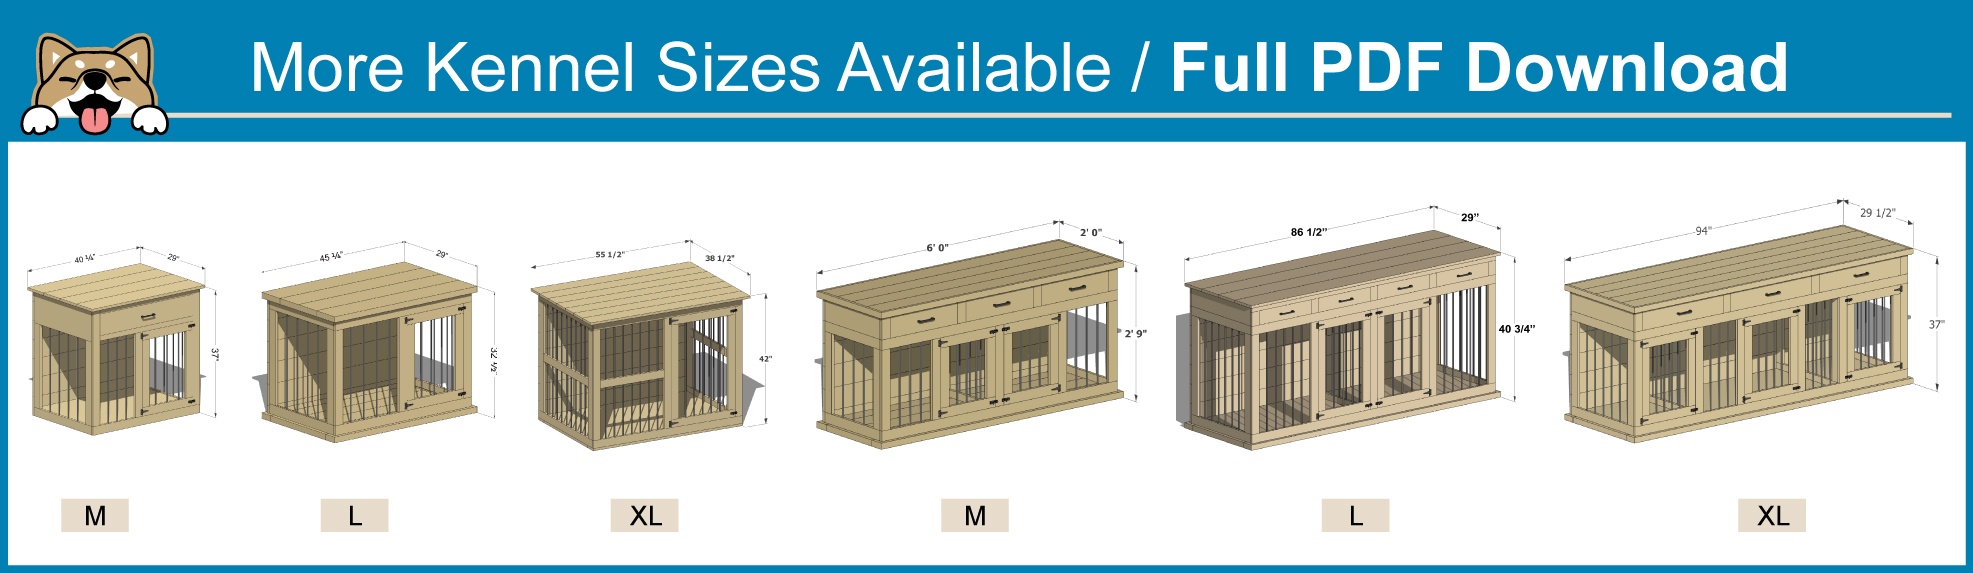 DIY Plans for Double Dog Kennel TV Stand Wooden Dog Crate 